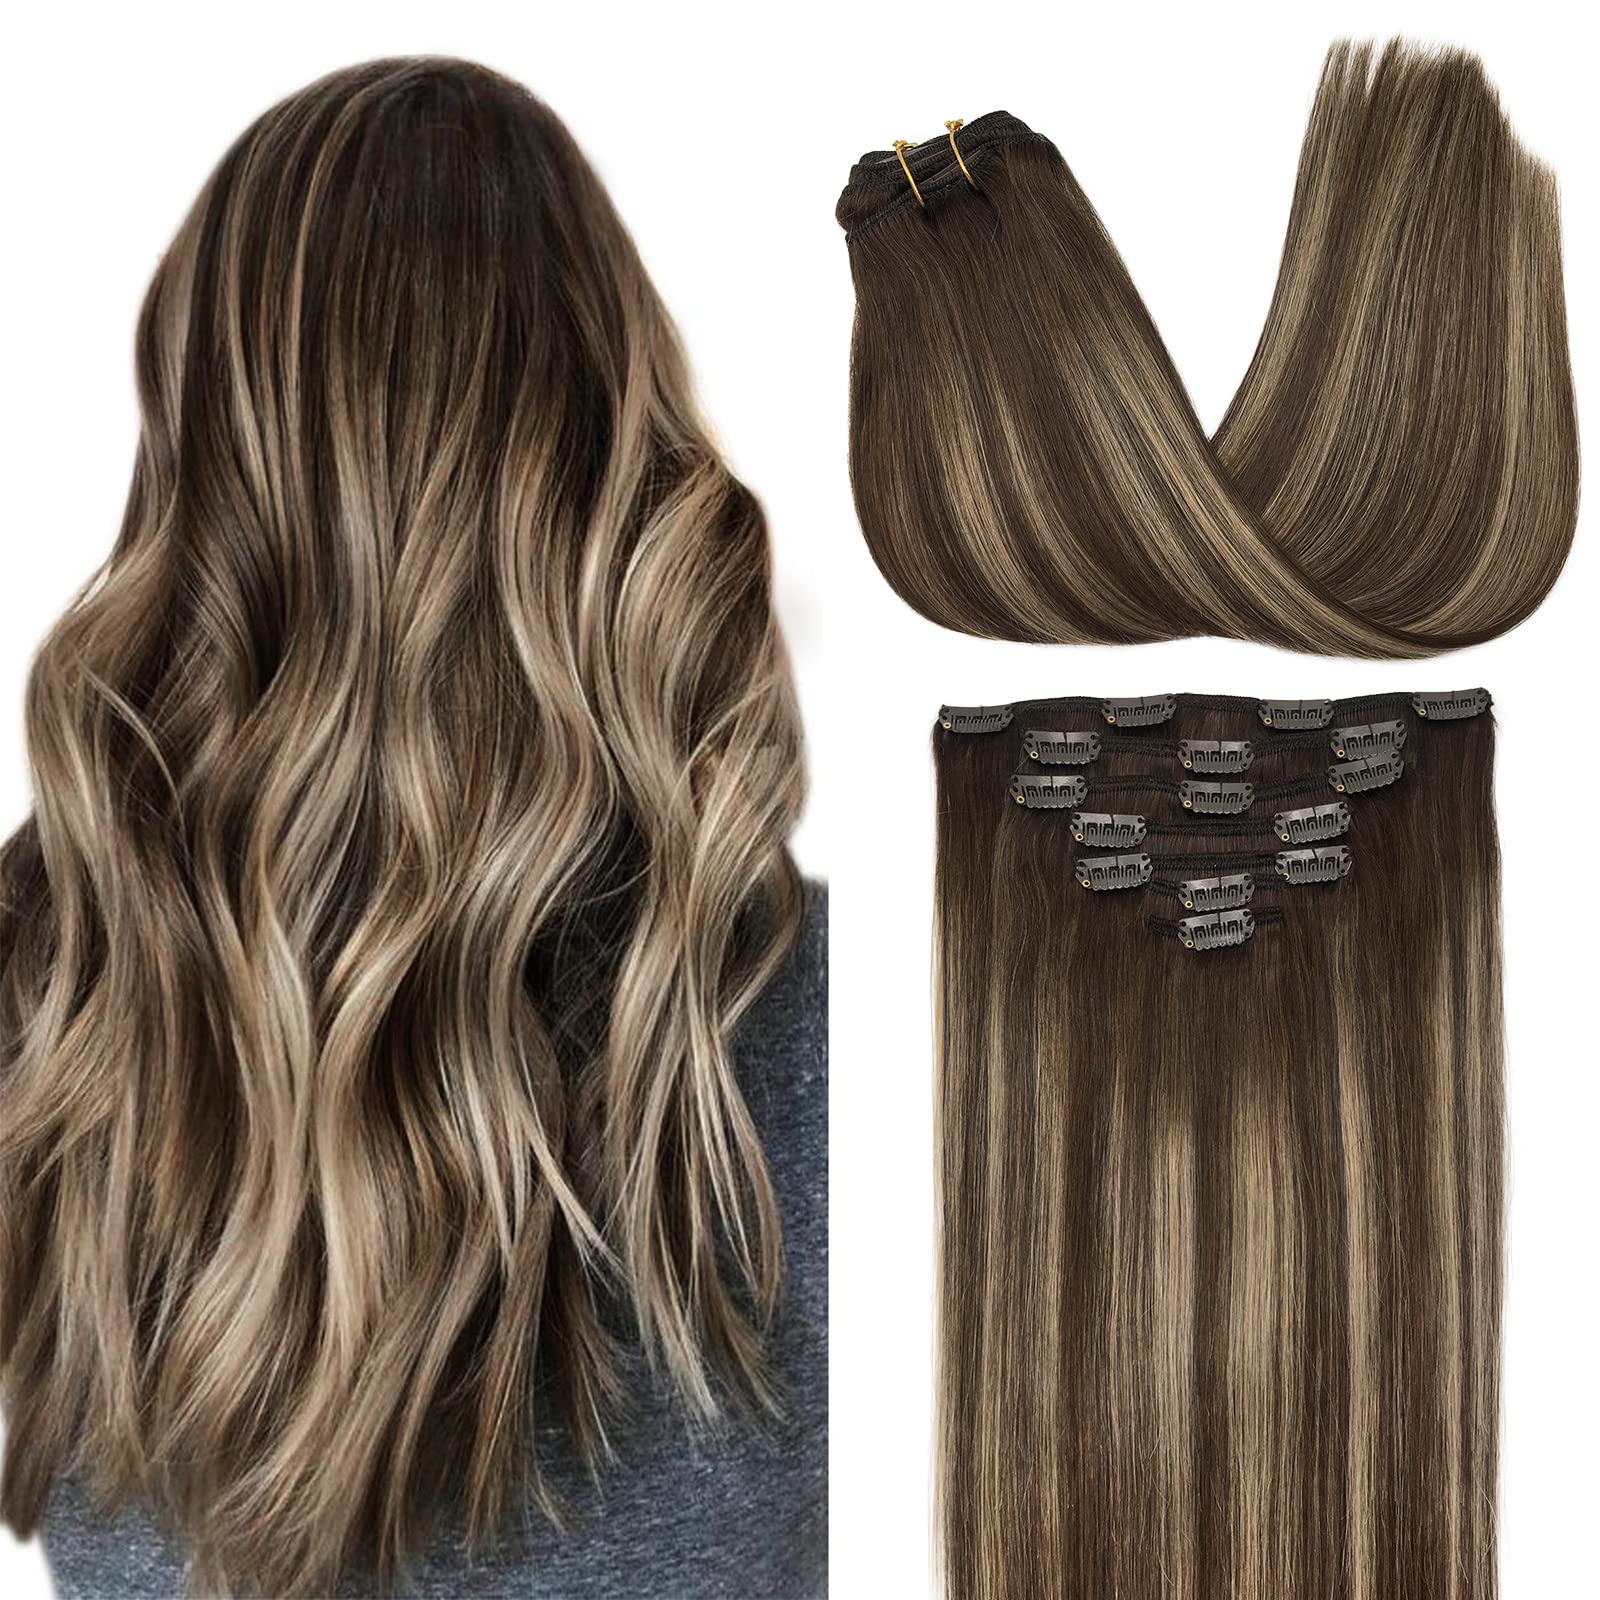 GOO GOO Clip-in Hair Extensions for Women, Soft & Natural, Handmade Real  Human Hair Extensions,